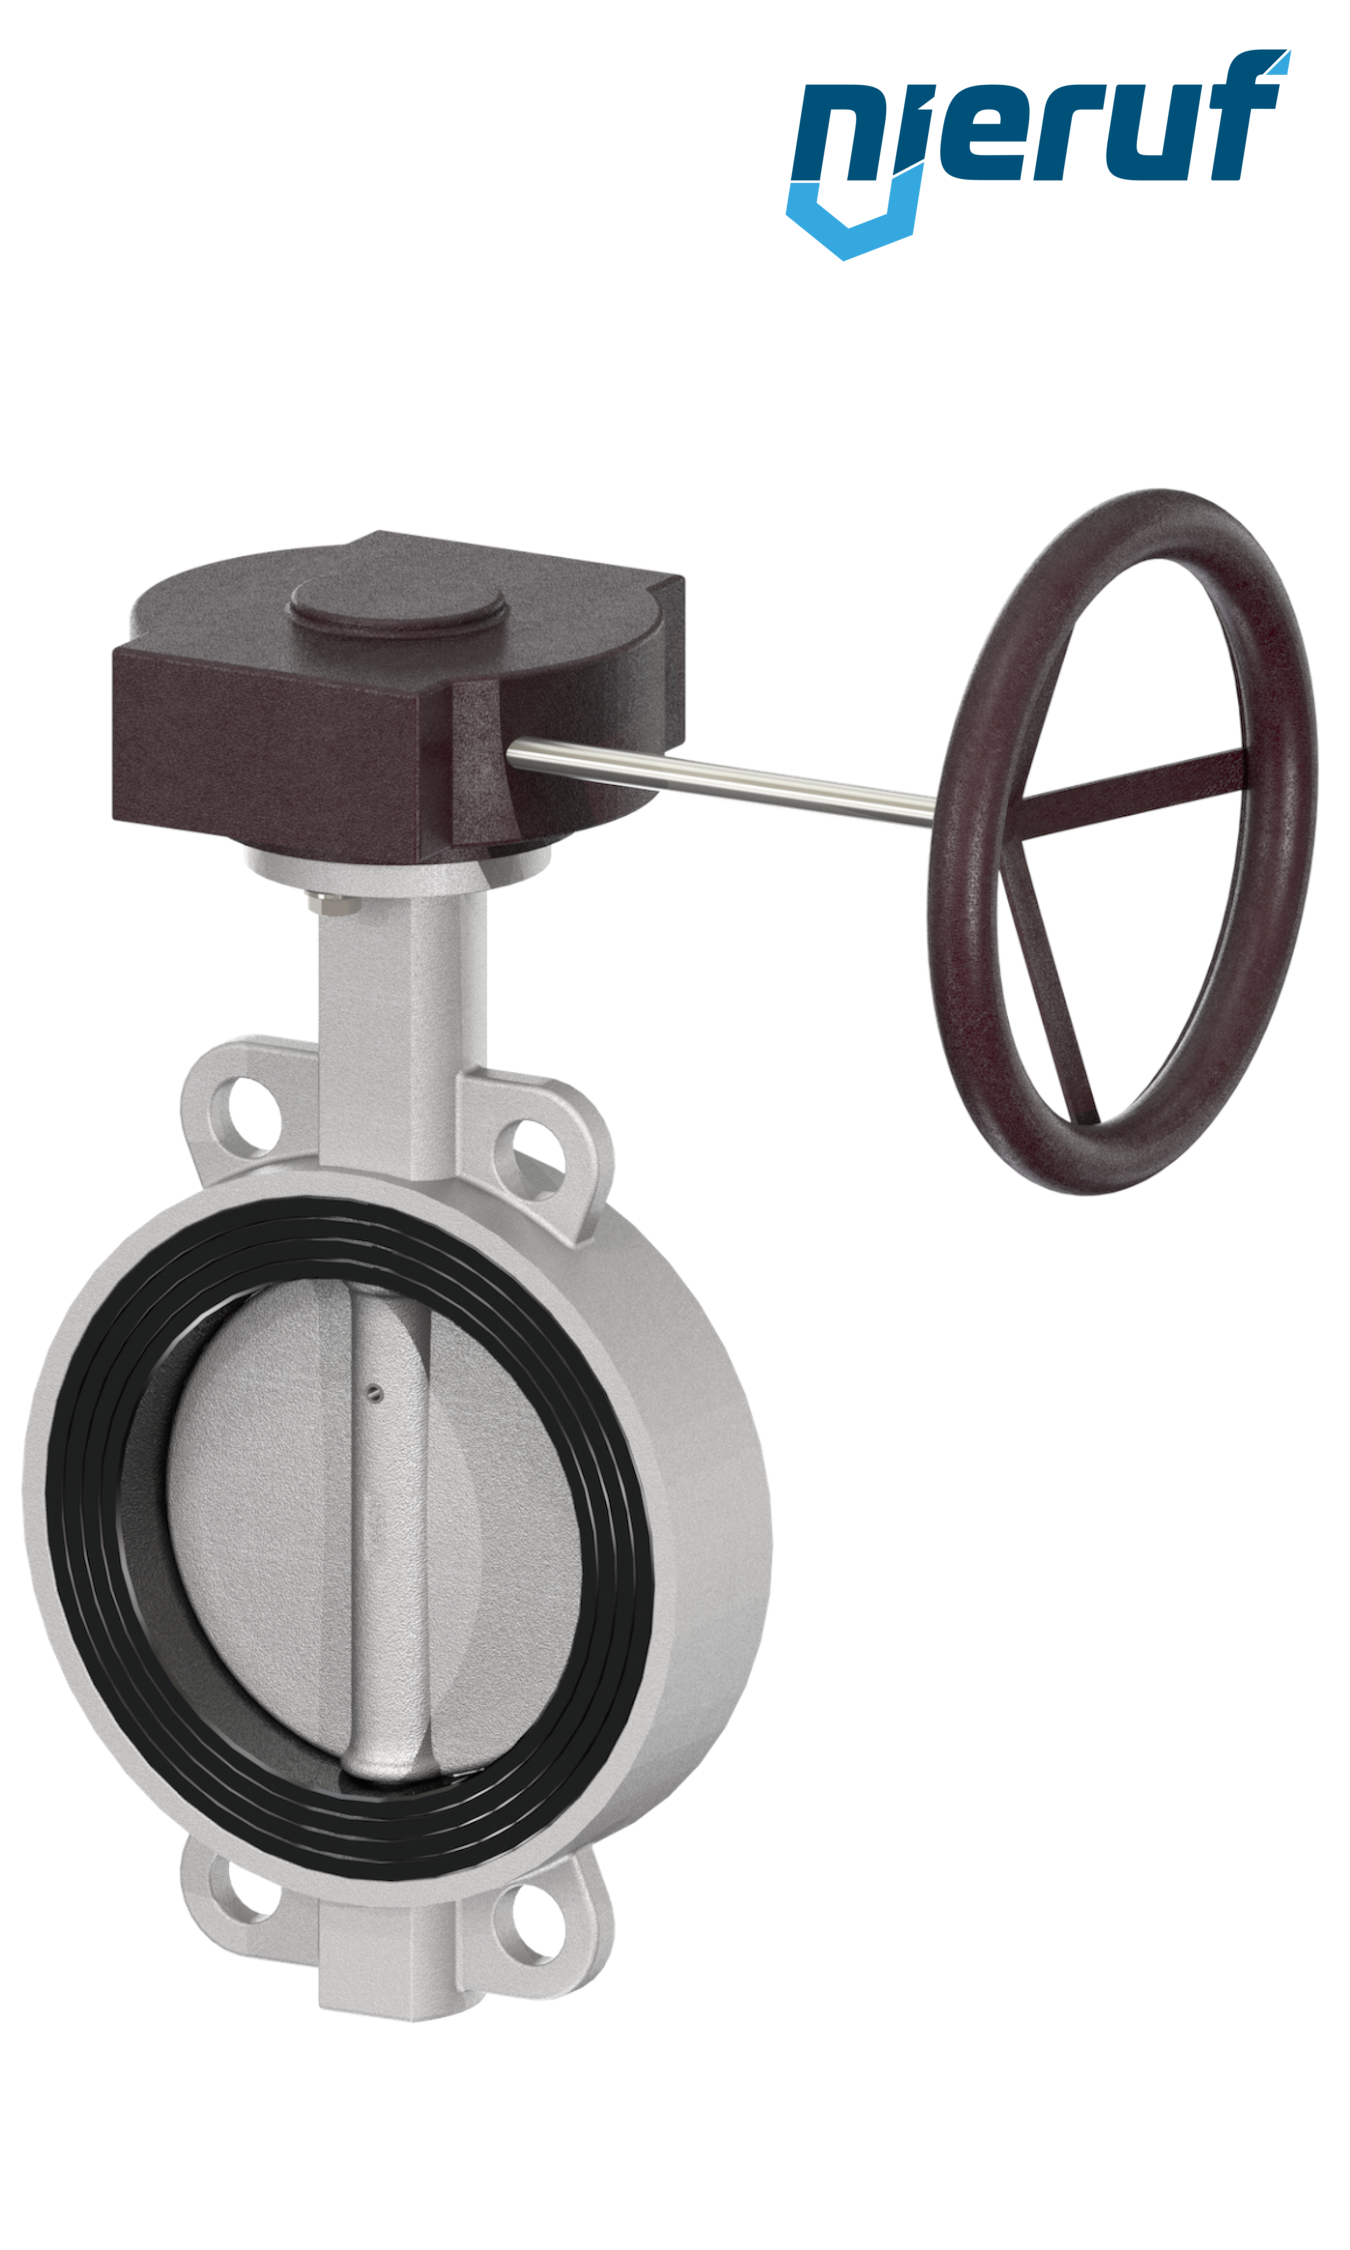 Butterfly-valve-stainless-steel DN 125 PN16 AK08 EPDM gearbox